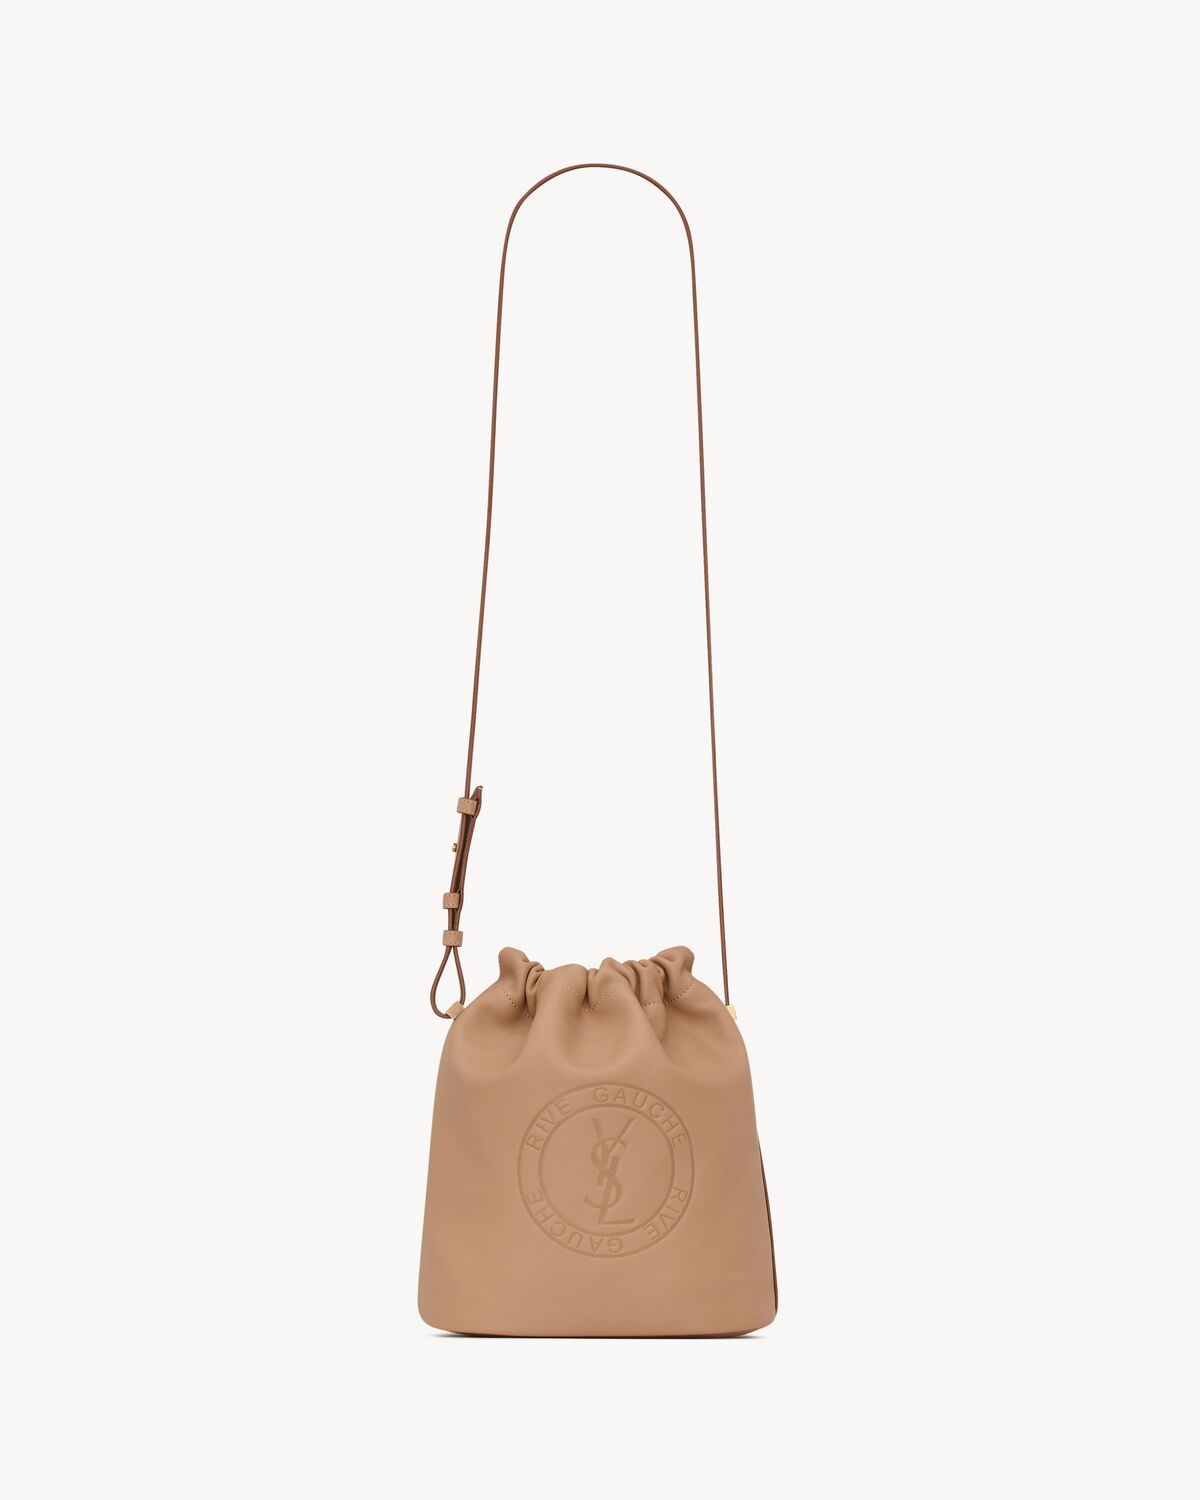 RIVE GAUCHE laced bucket bag in smooth leather